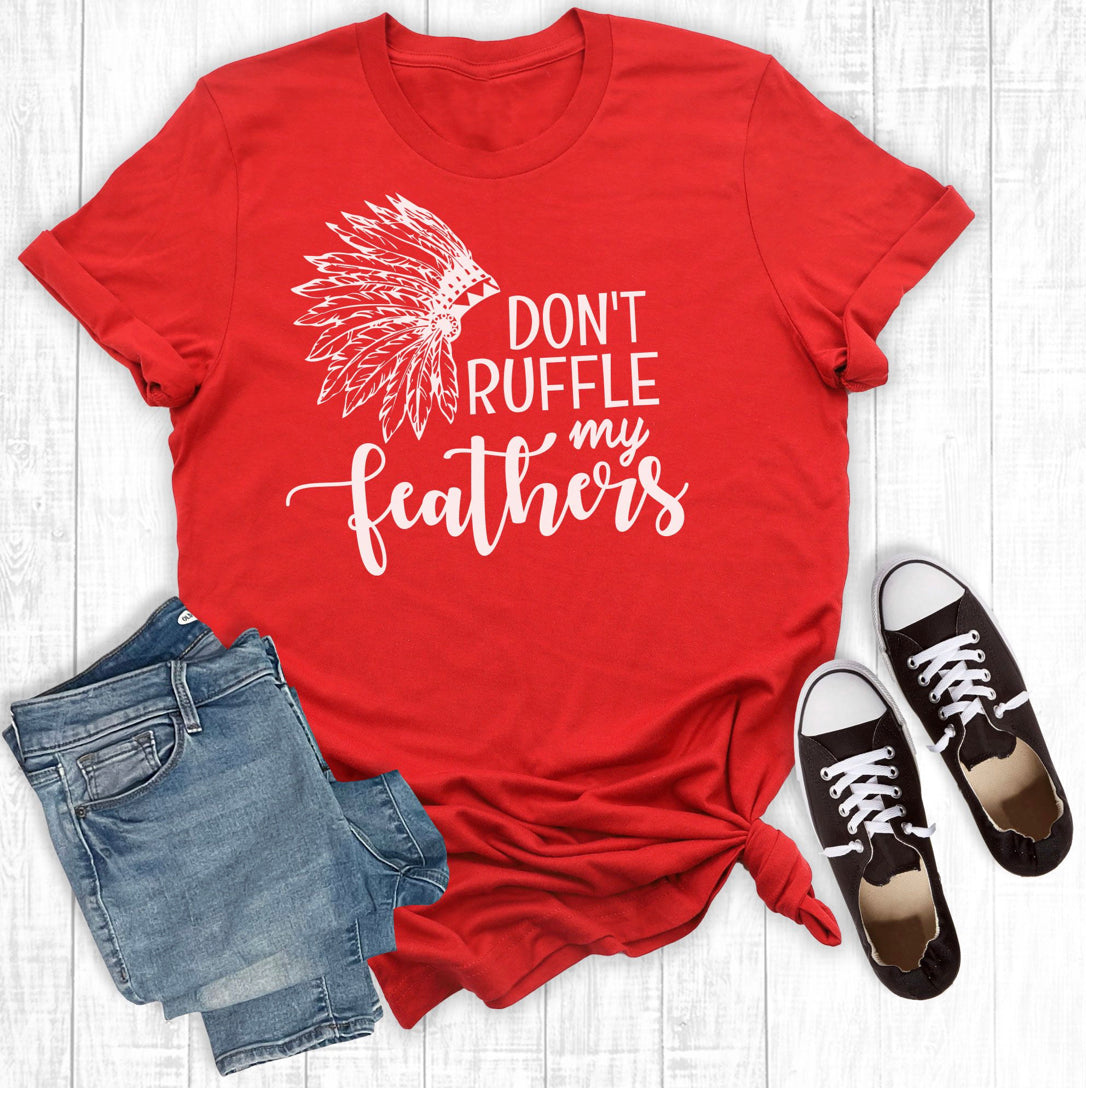 Don’t ruffle my feathers tee